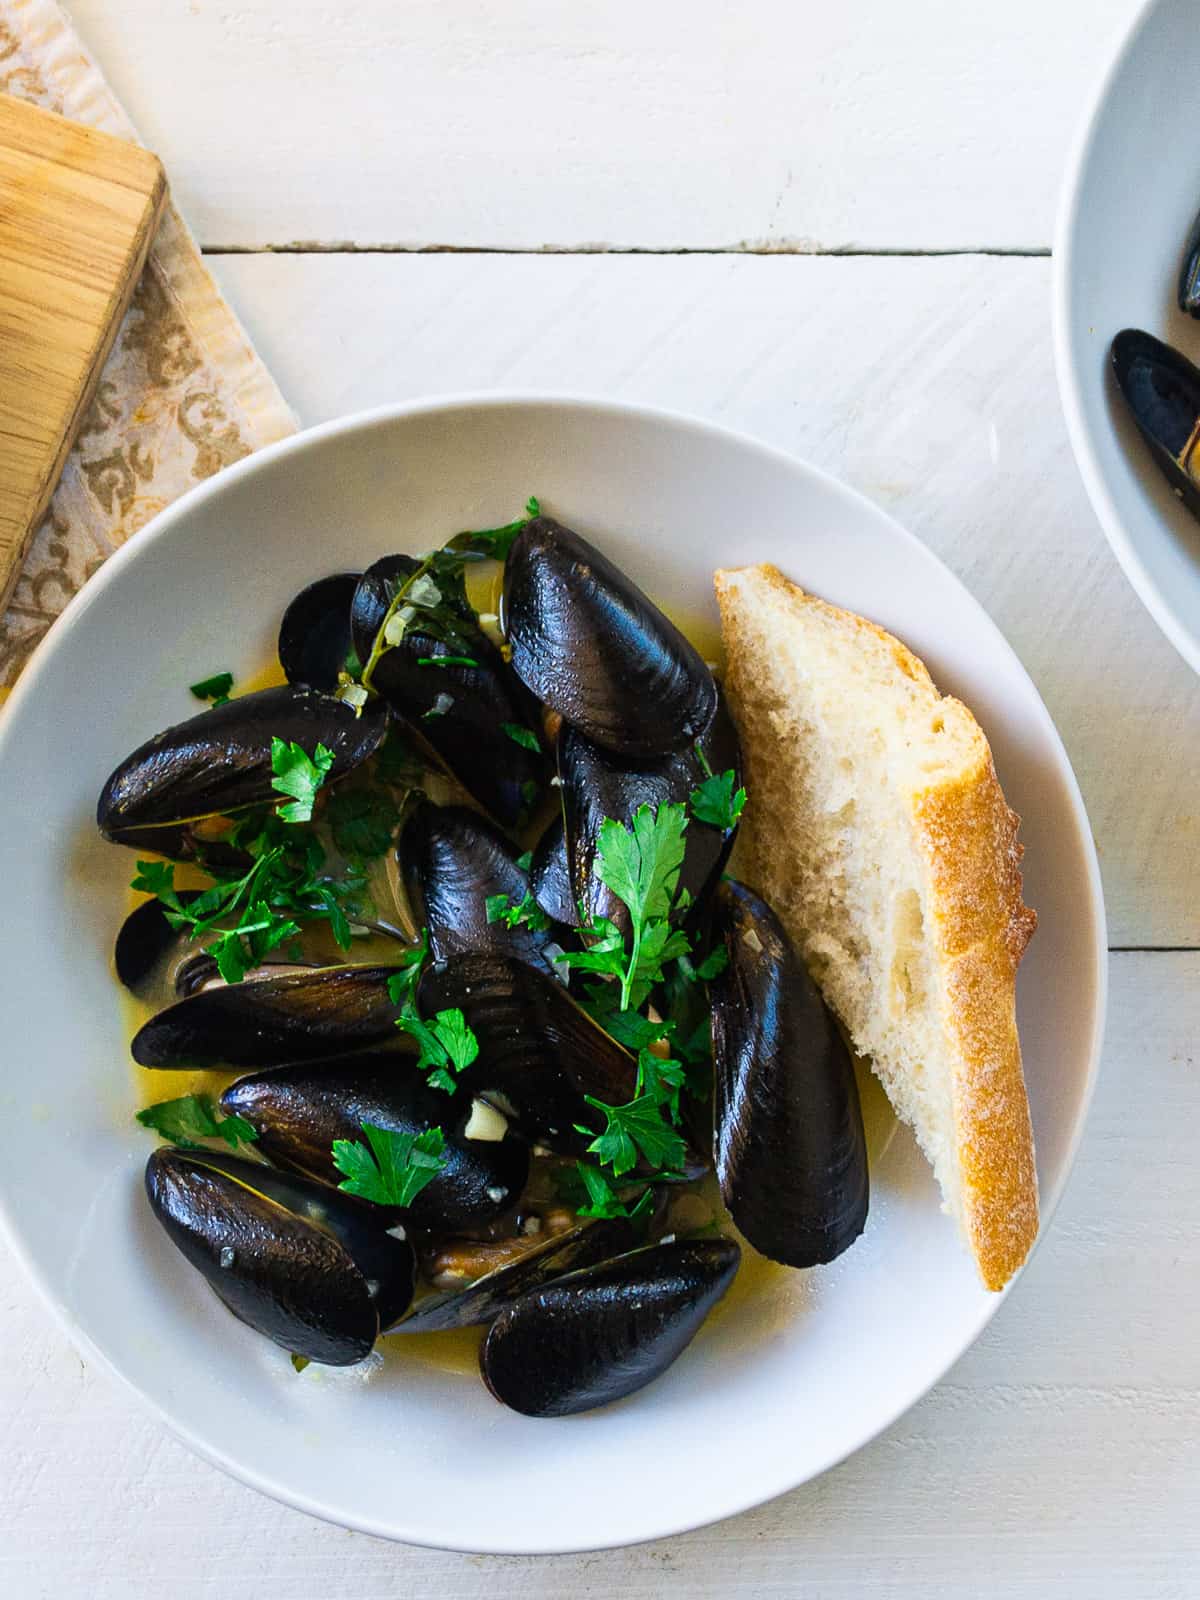 Mussels mariniere are steamed mussels flavored with herbs, butter, garlic and shallot.